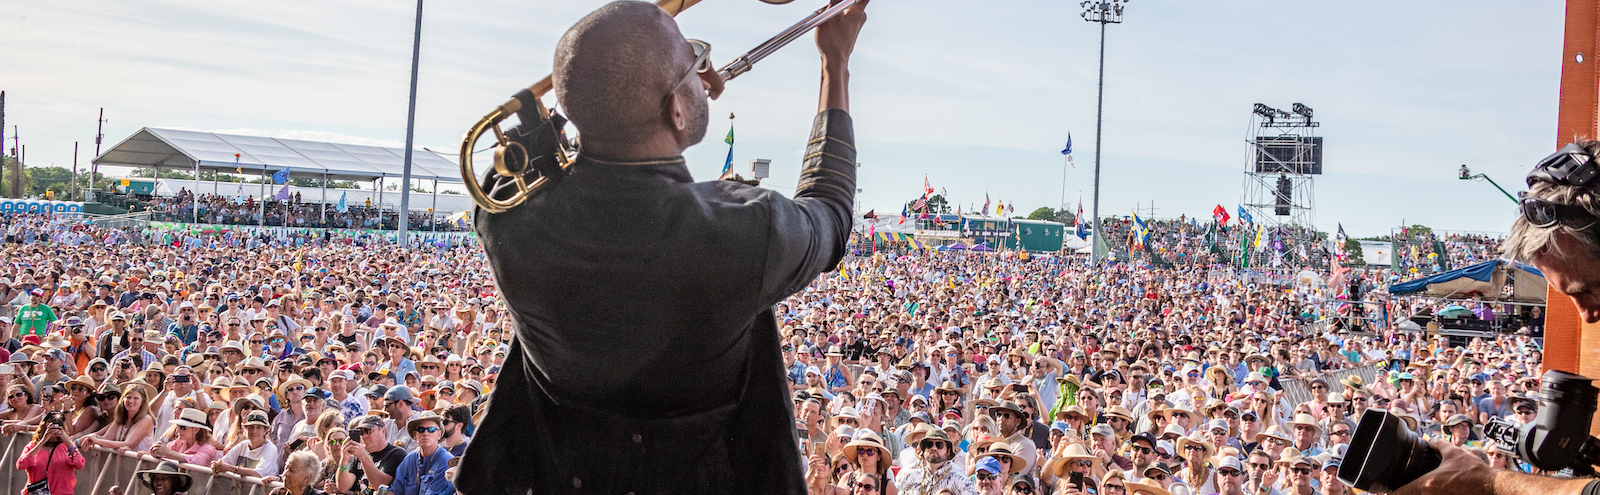 Jazz Fest Schedule 2022 New Orleans Jazz Fest 2022 Returns With A Monster Lineup